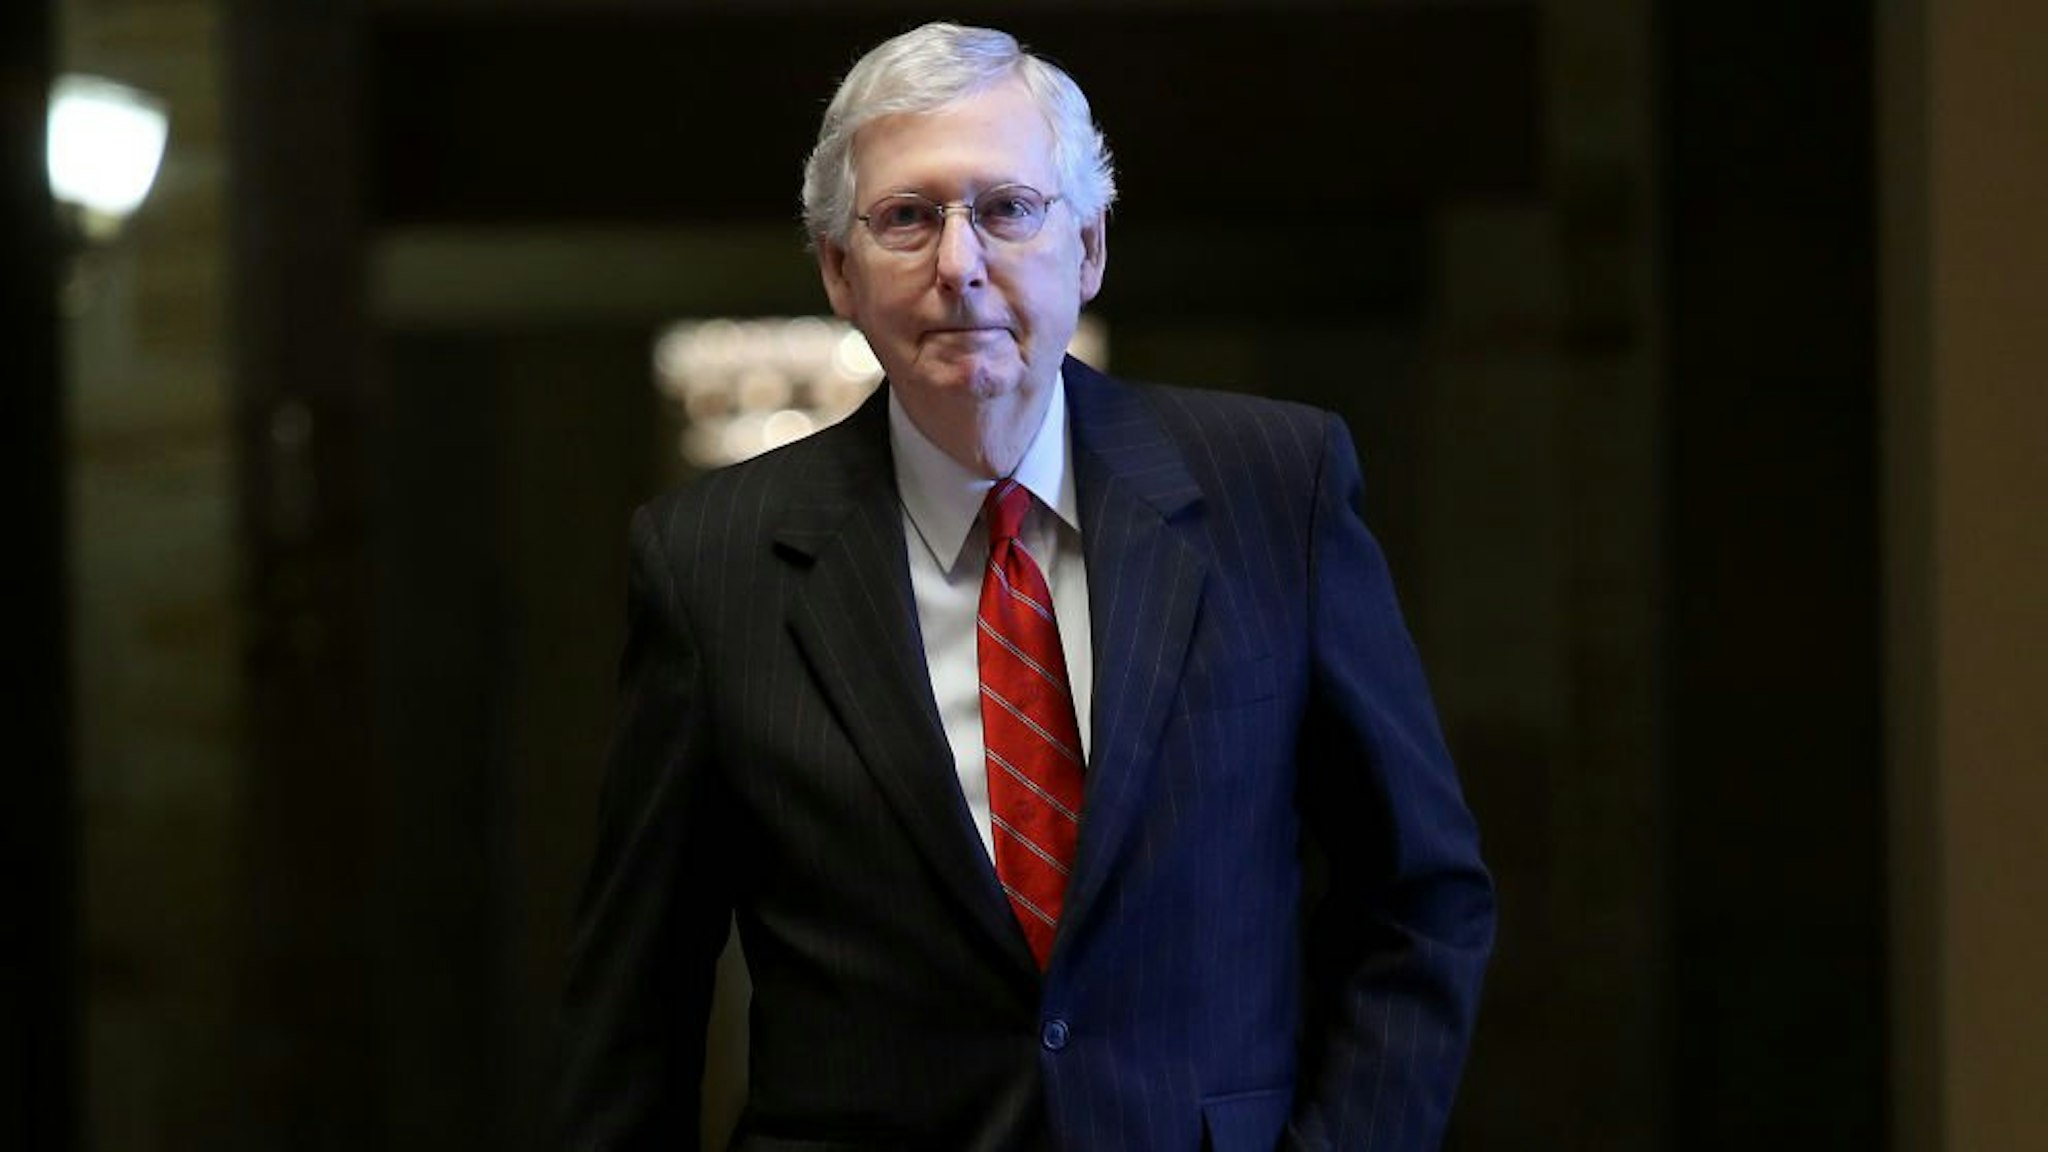 Senate Majority Leader Mitch McConnell (R-KY) walks to a series of votes at the U.S. Capitol August 1, 2019 in Washington, DC.